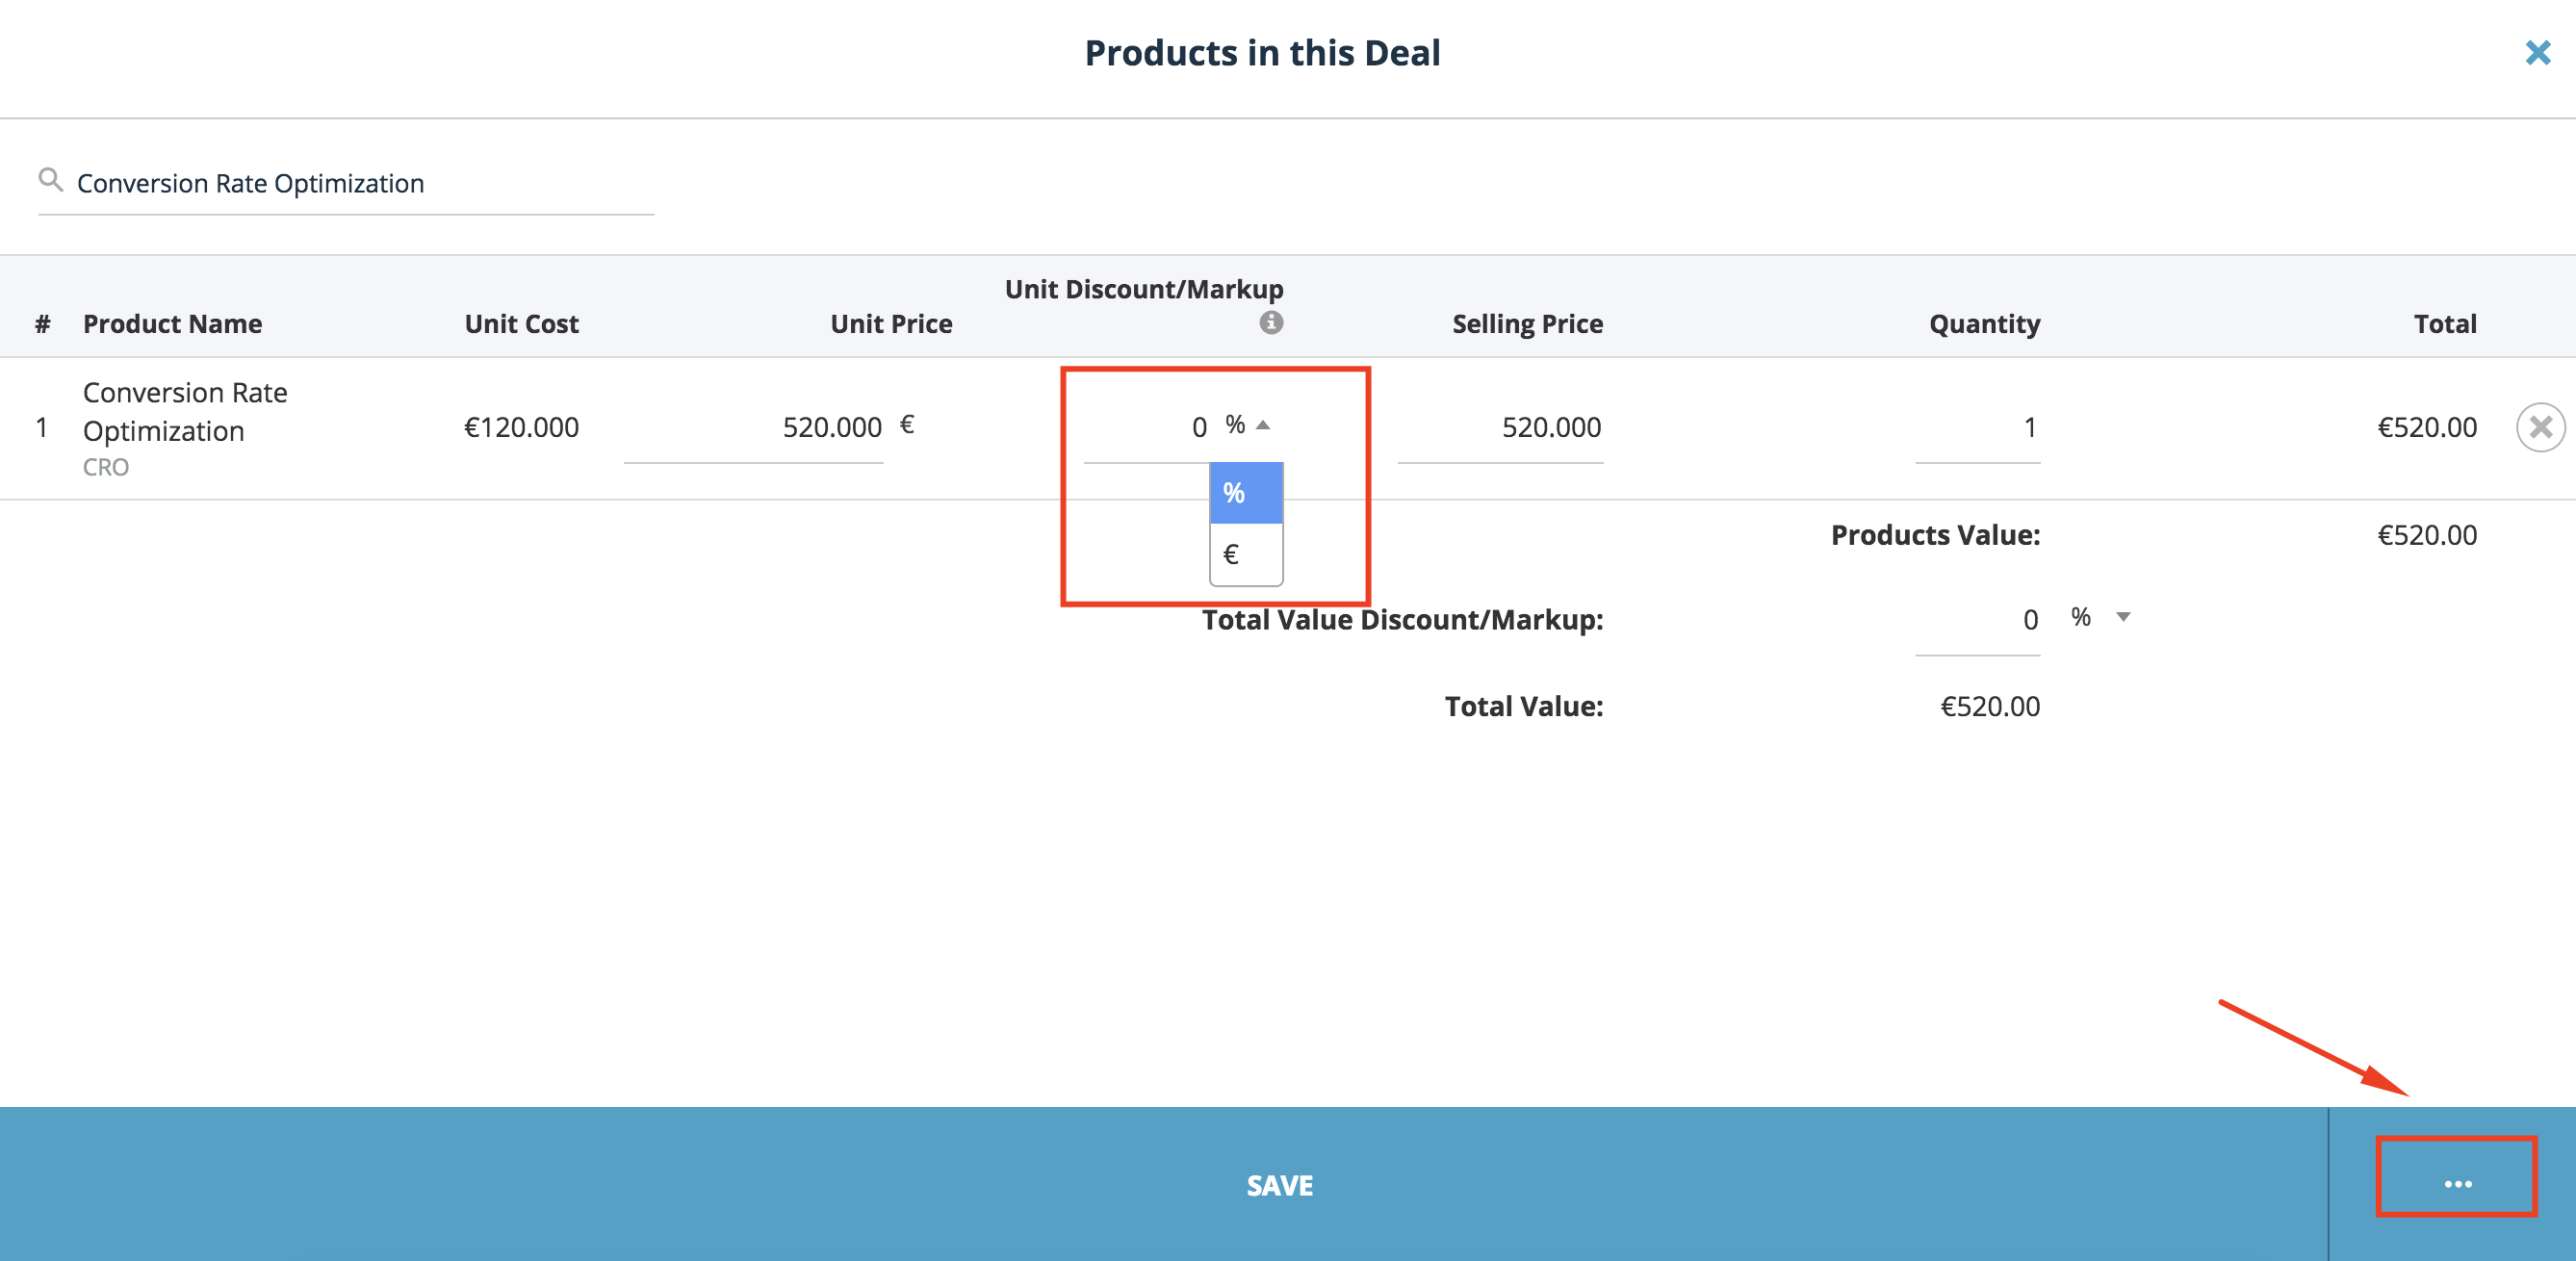 products-in-this-deal-edit-information-Teamgate-CRM.png